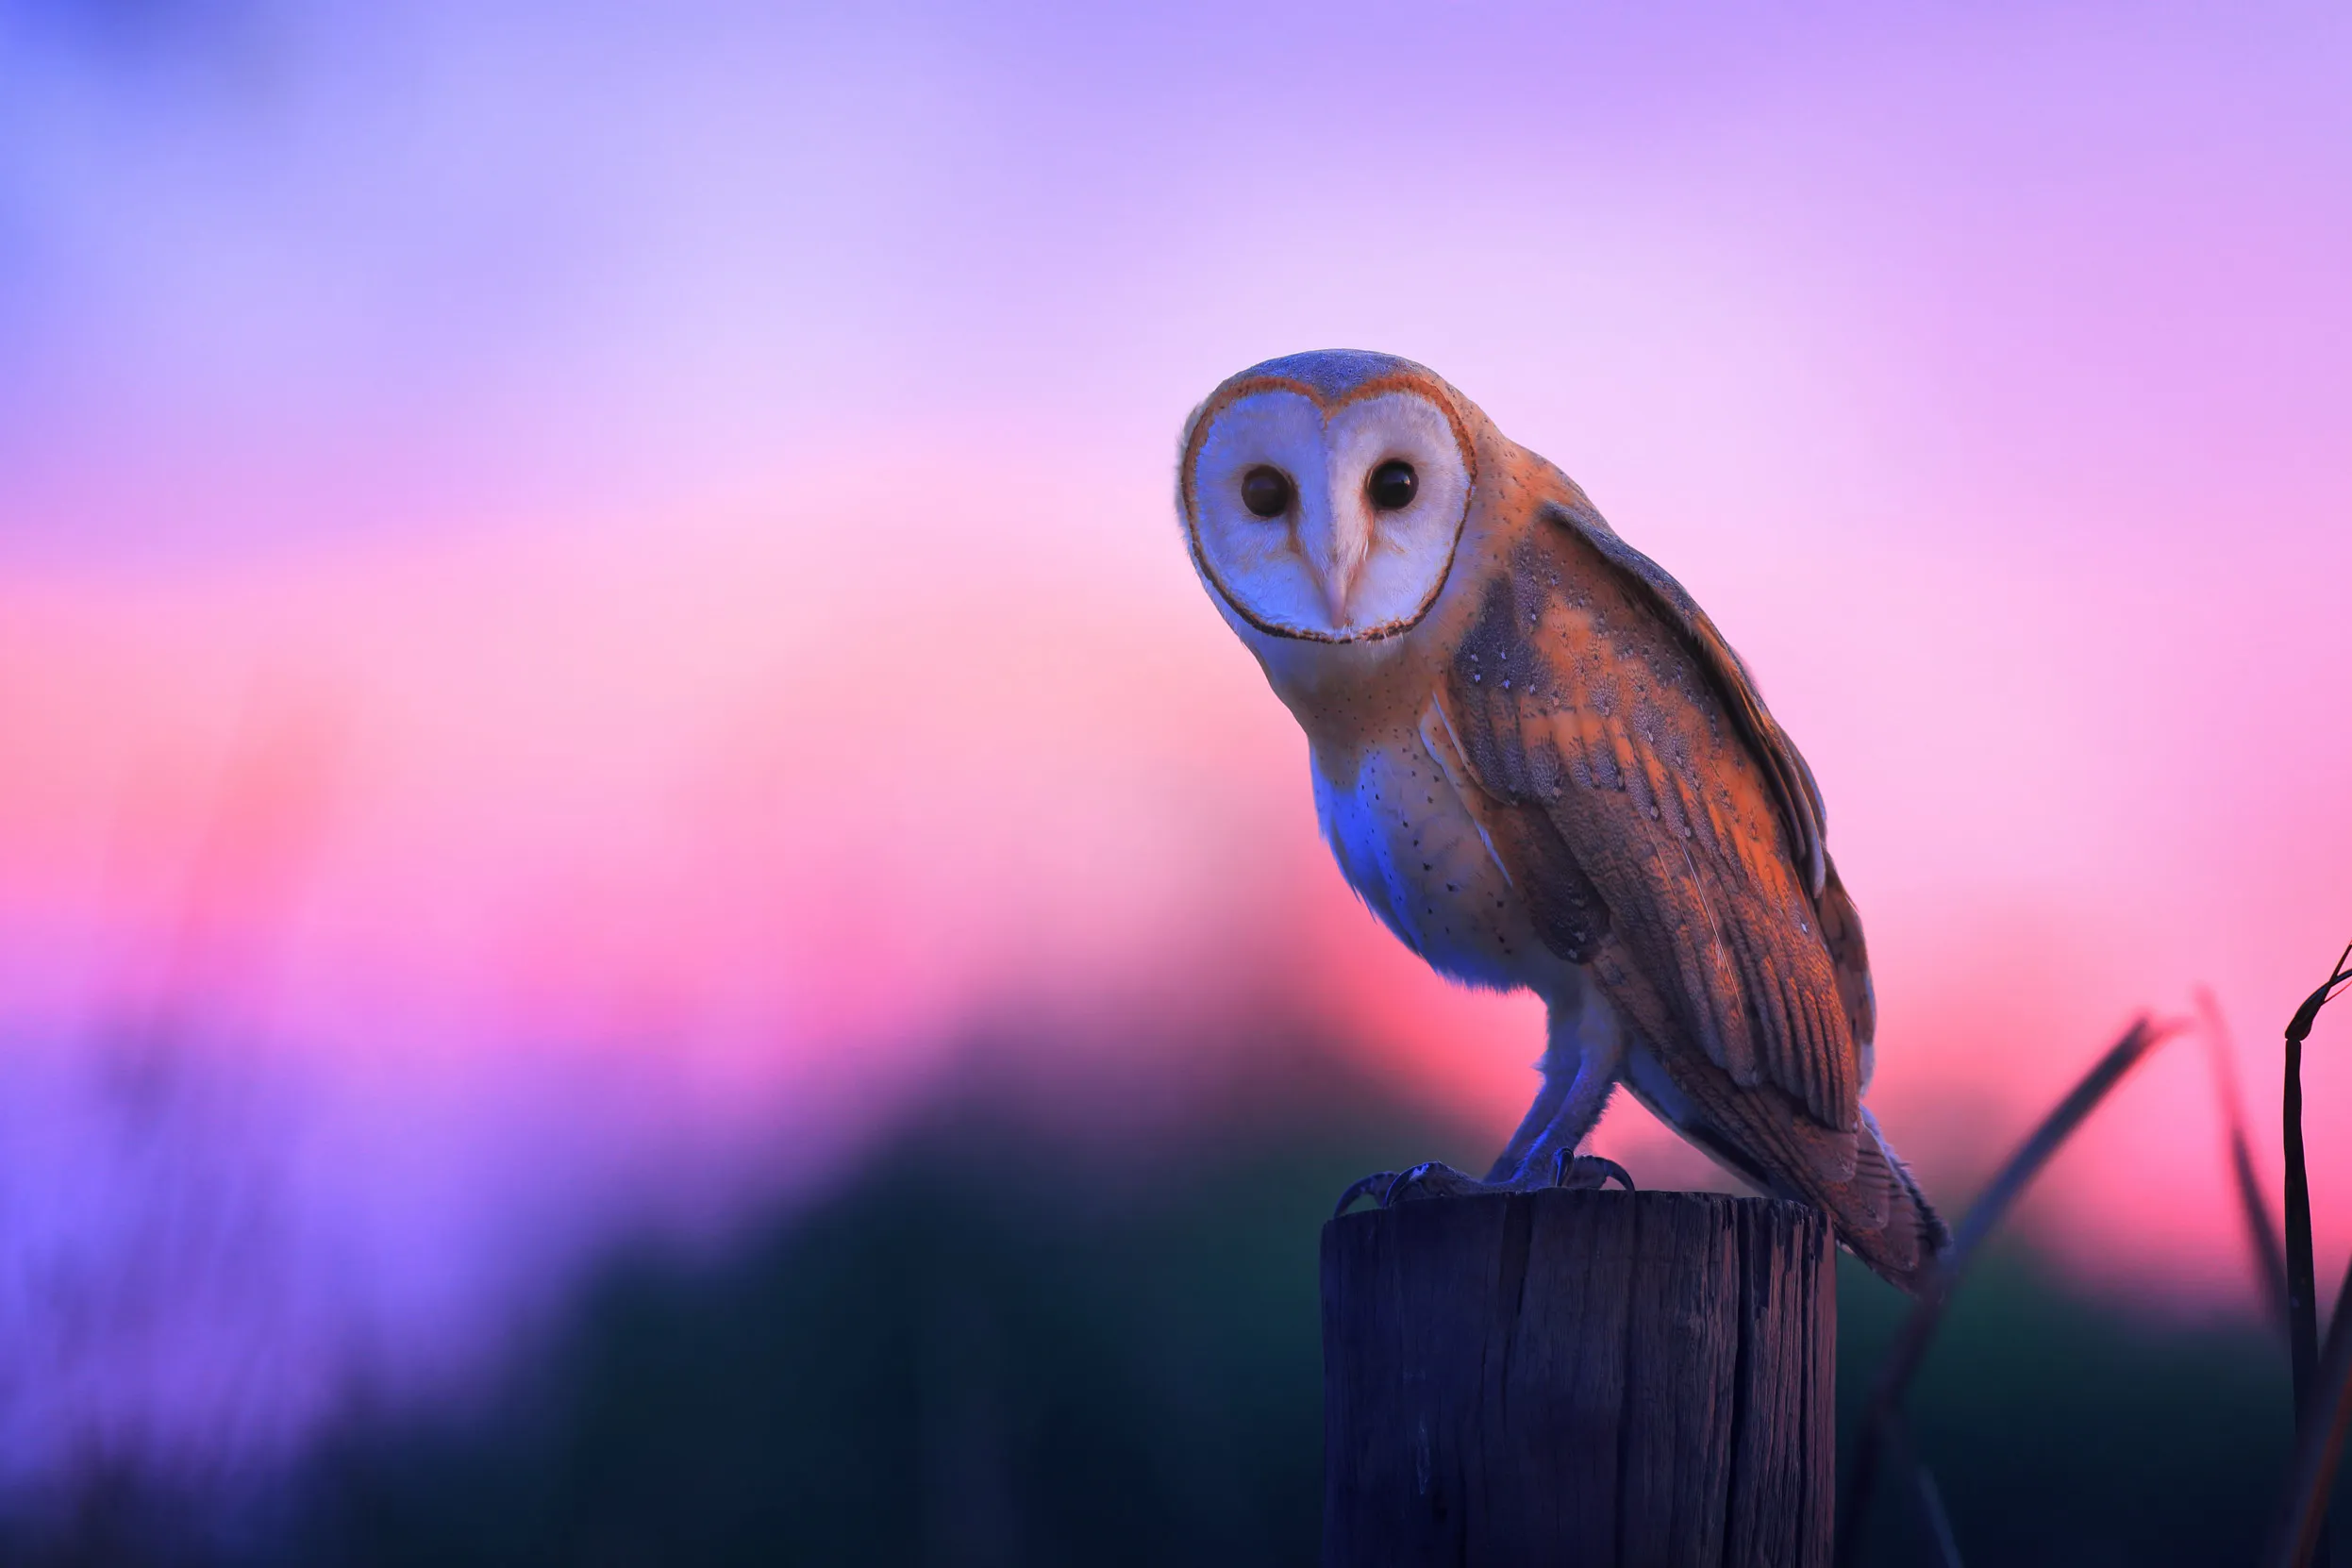 Barn Owl perched on a tree stump.